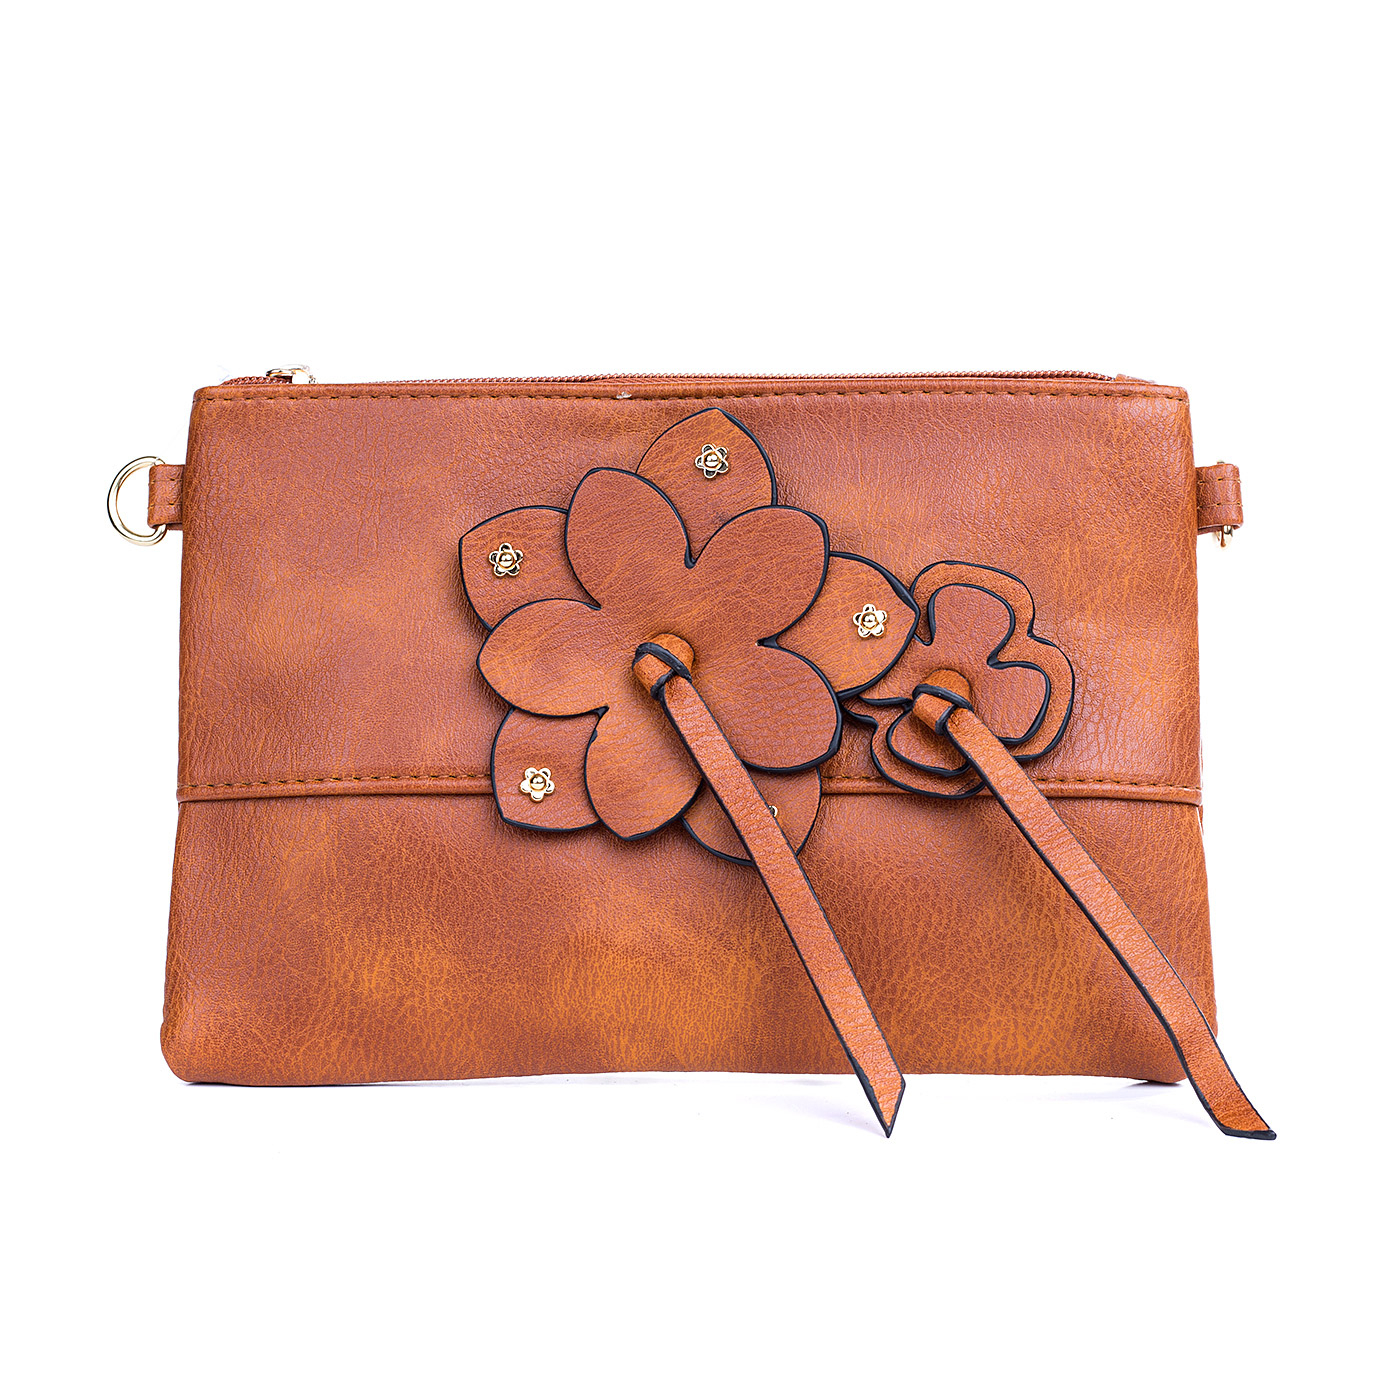 *NEW* Crossbody Bag - Flower Zip: Enjoy effortless style with the Flower Zip Crossbody Bag! Whether you prefer a dark hue or something more subtle, we have the perfect shade for you. This purse is su - Ciao Bella Dresses